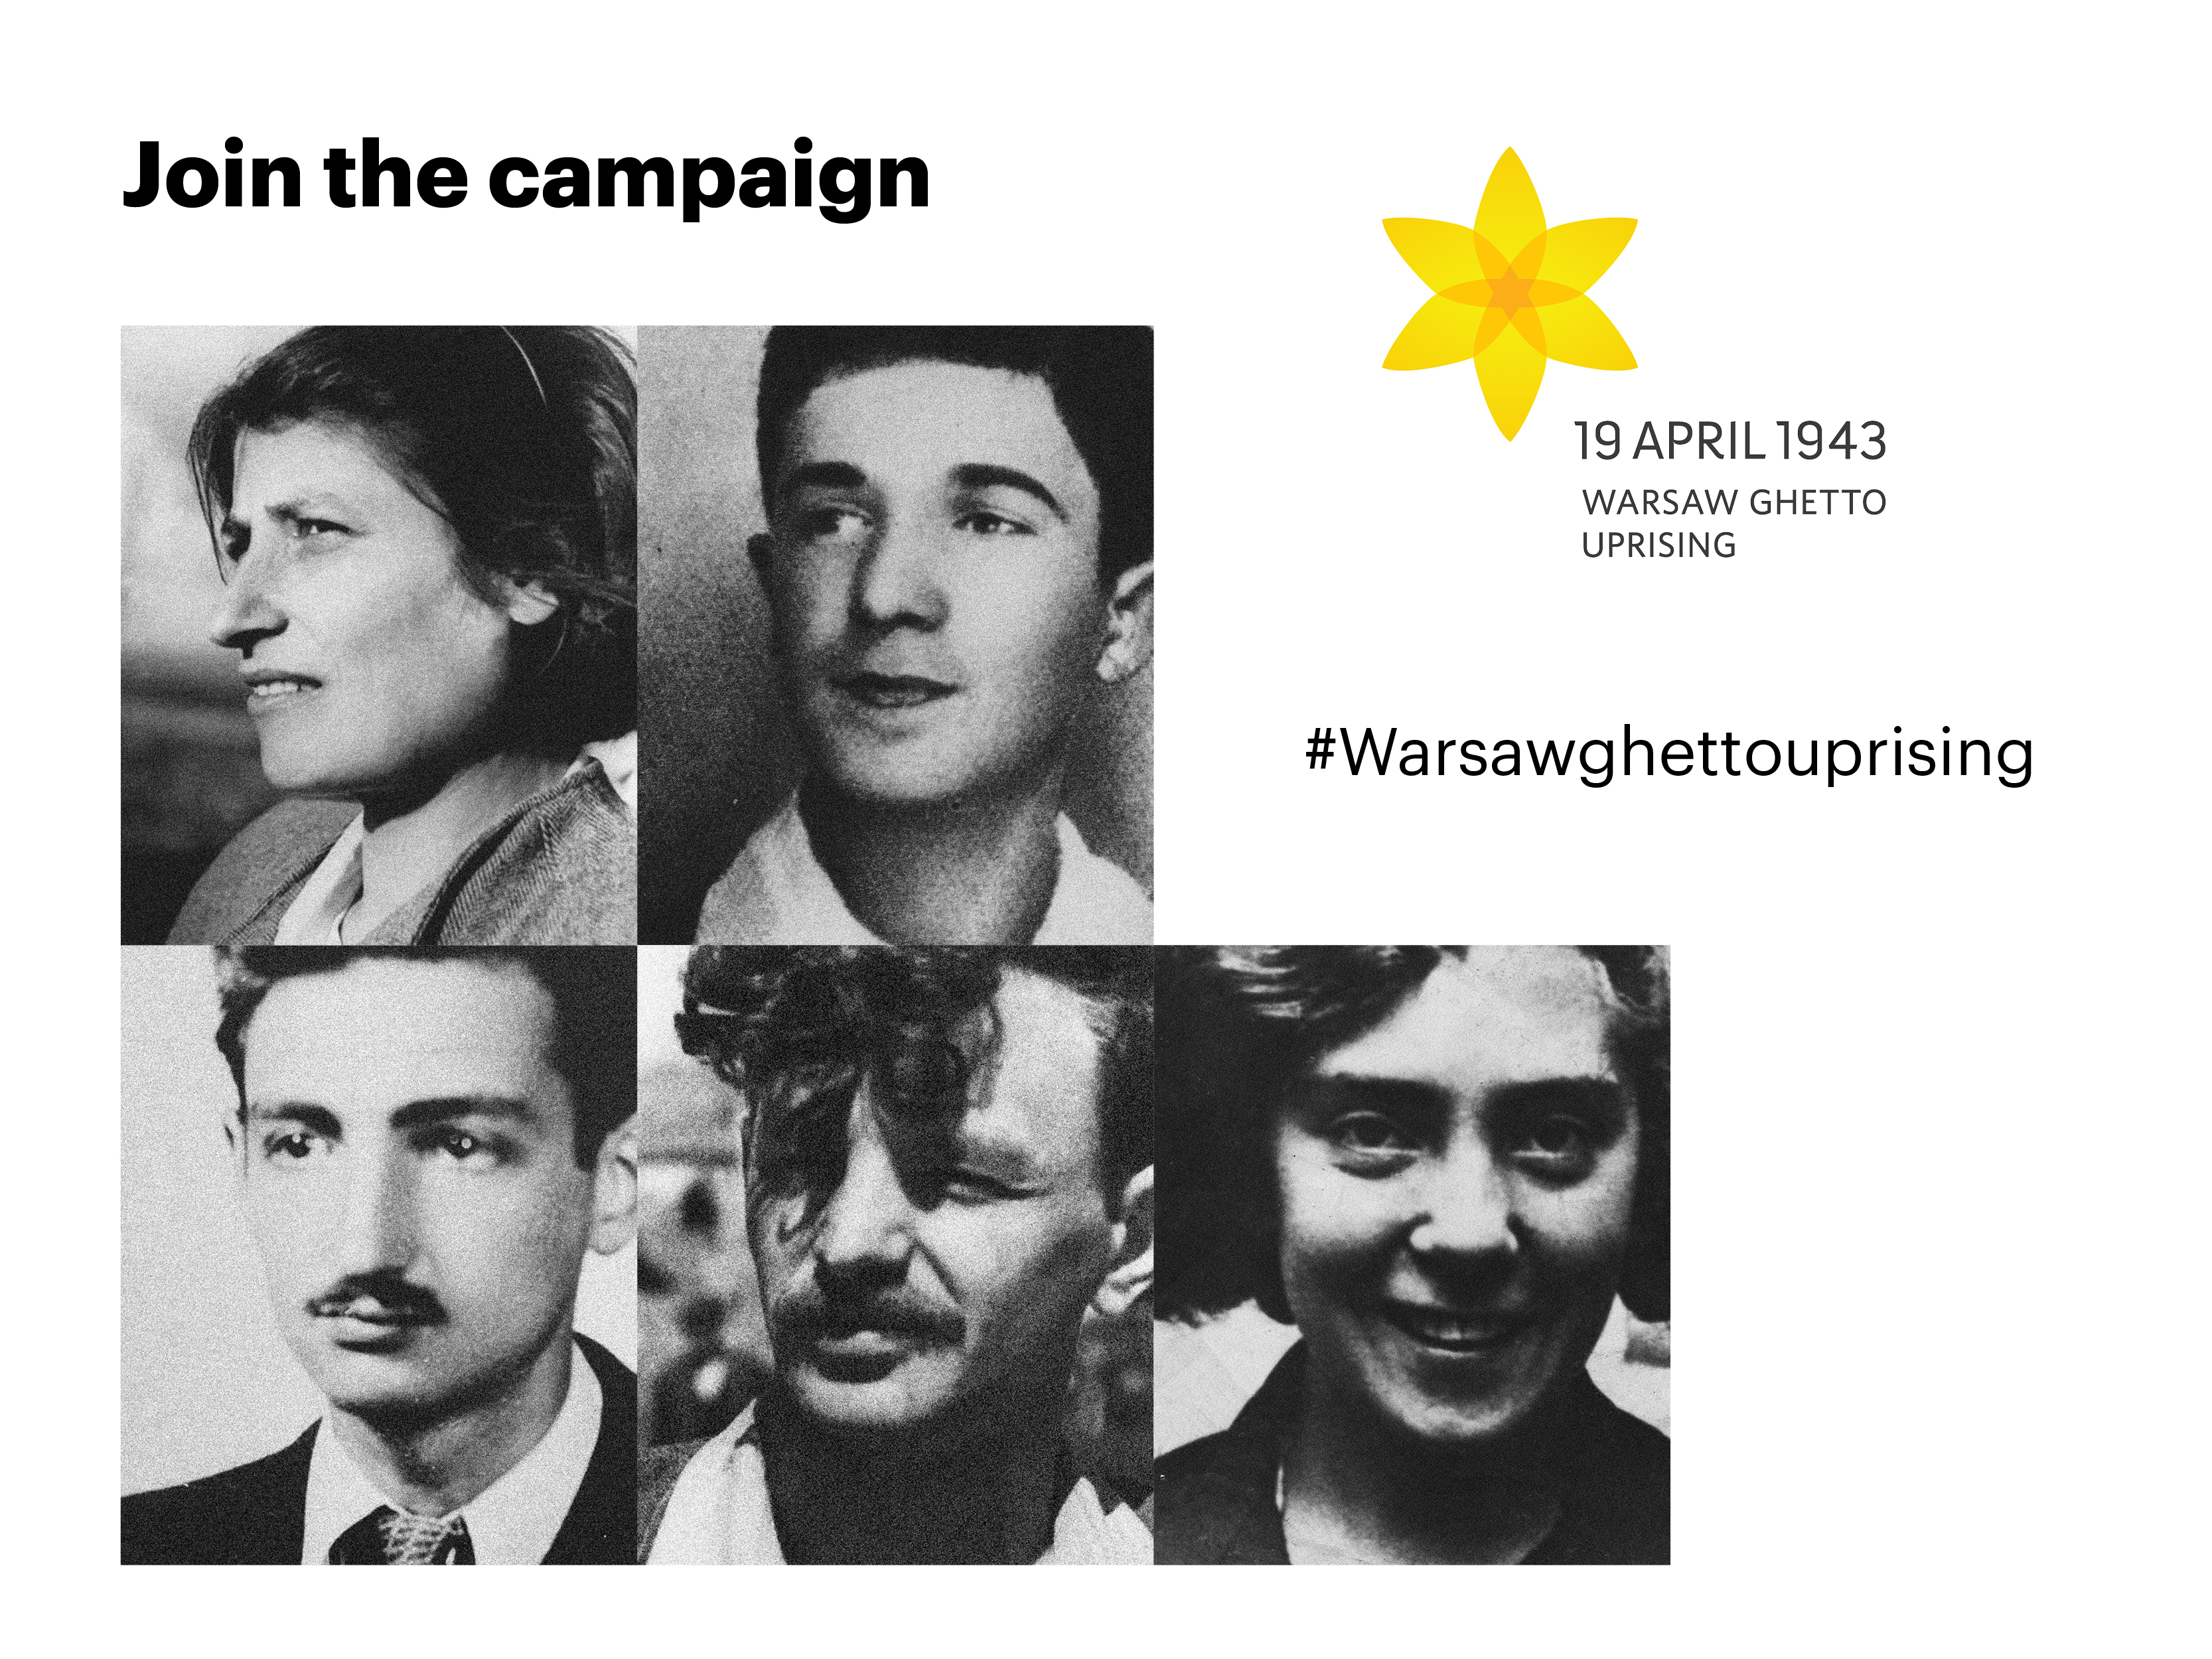 ENRS joins the Warsaw Ghetto Uprising Campaign